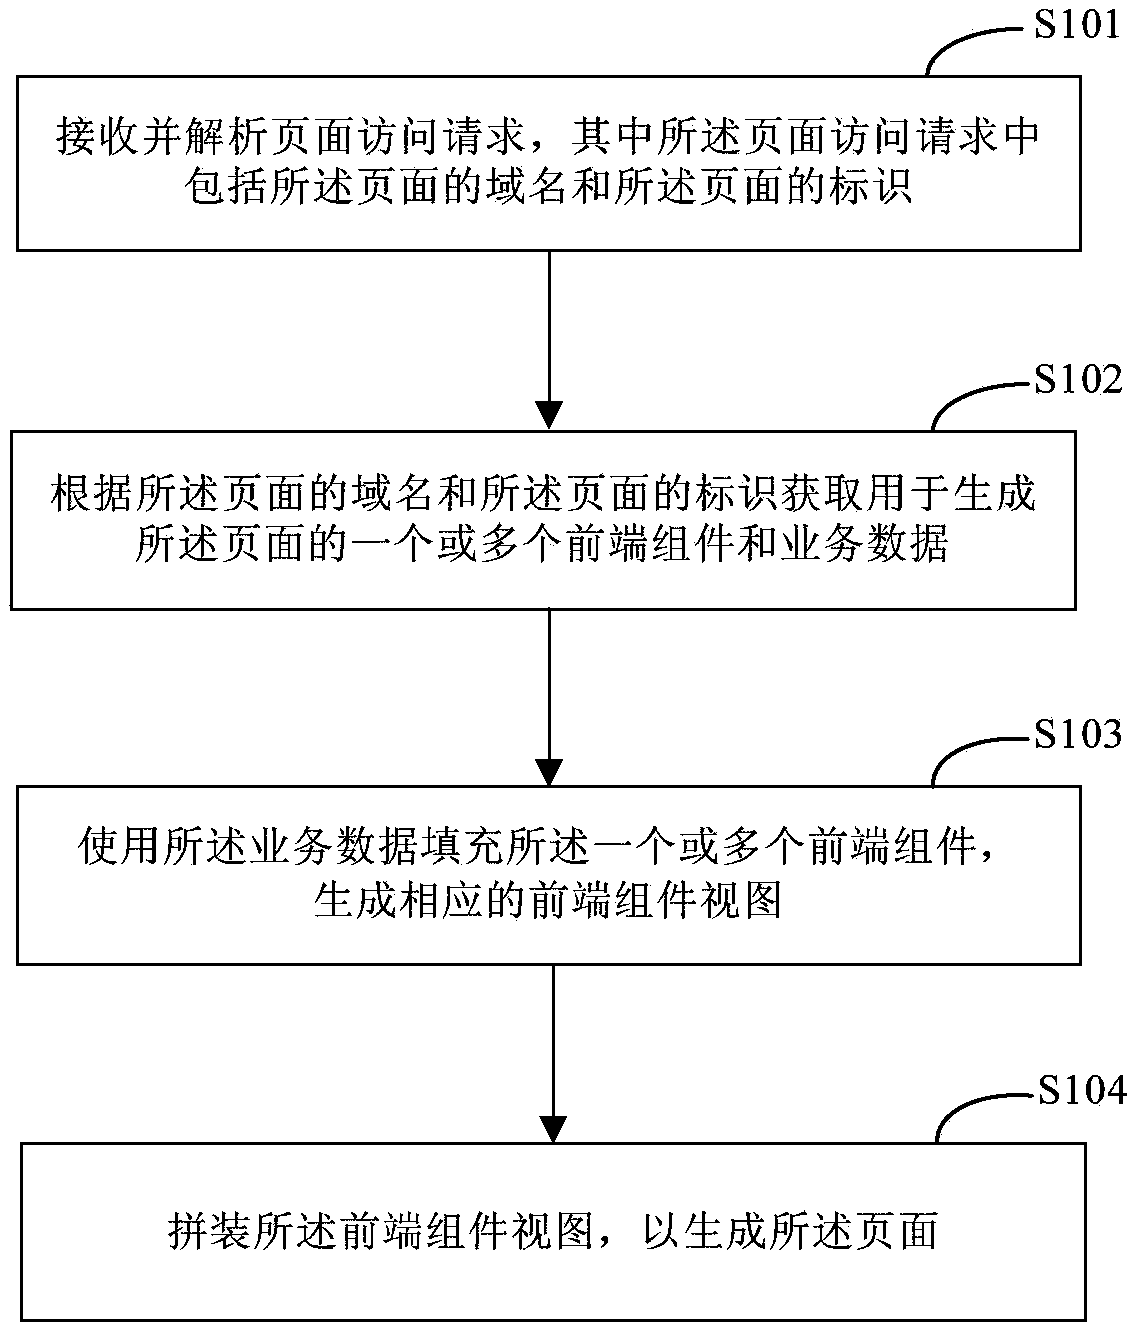 Method and system for generating page